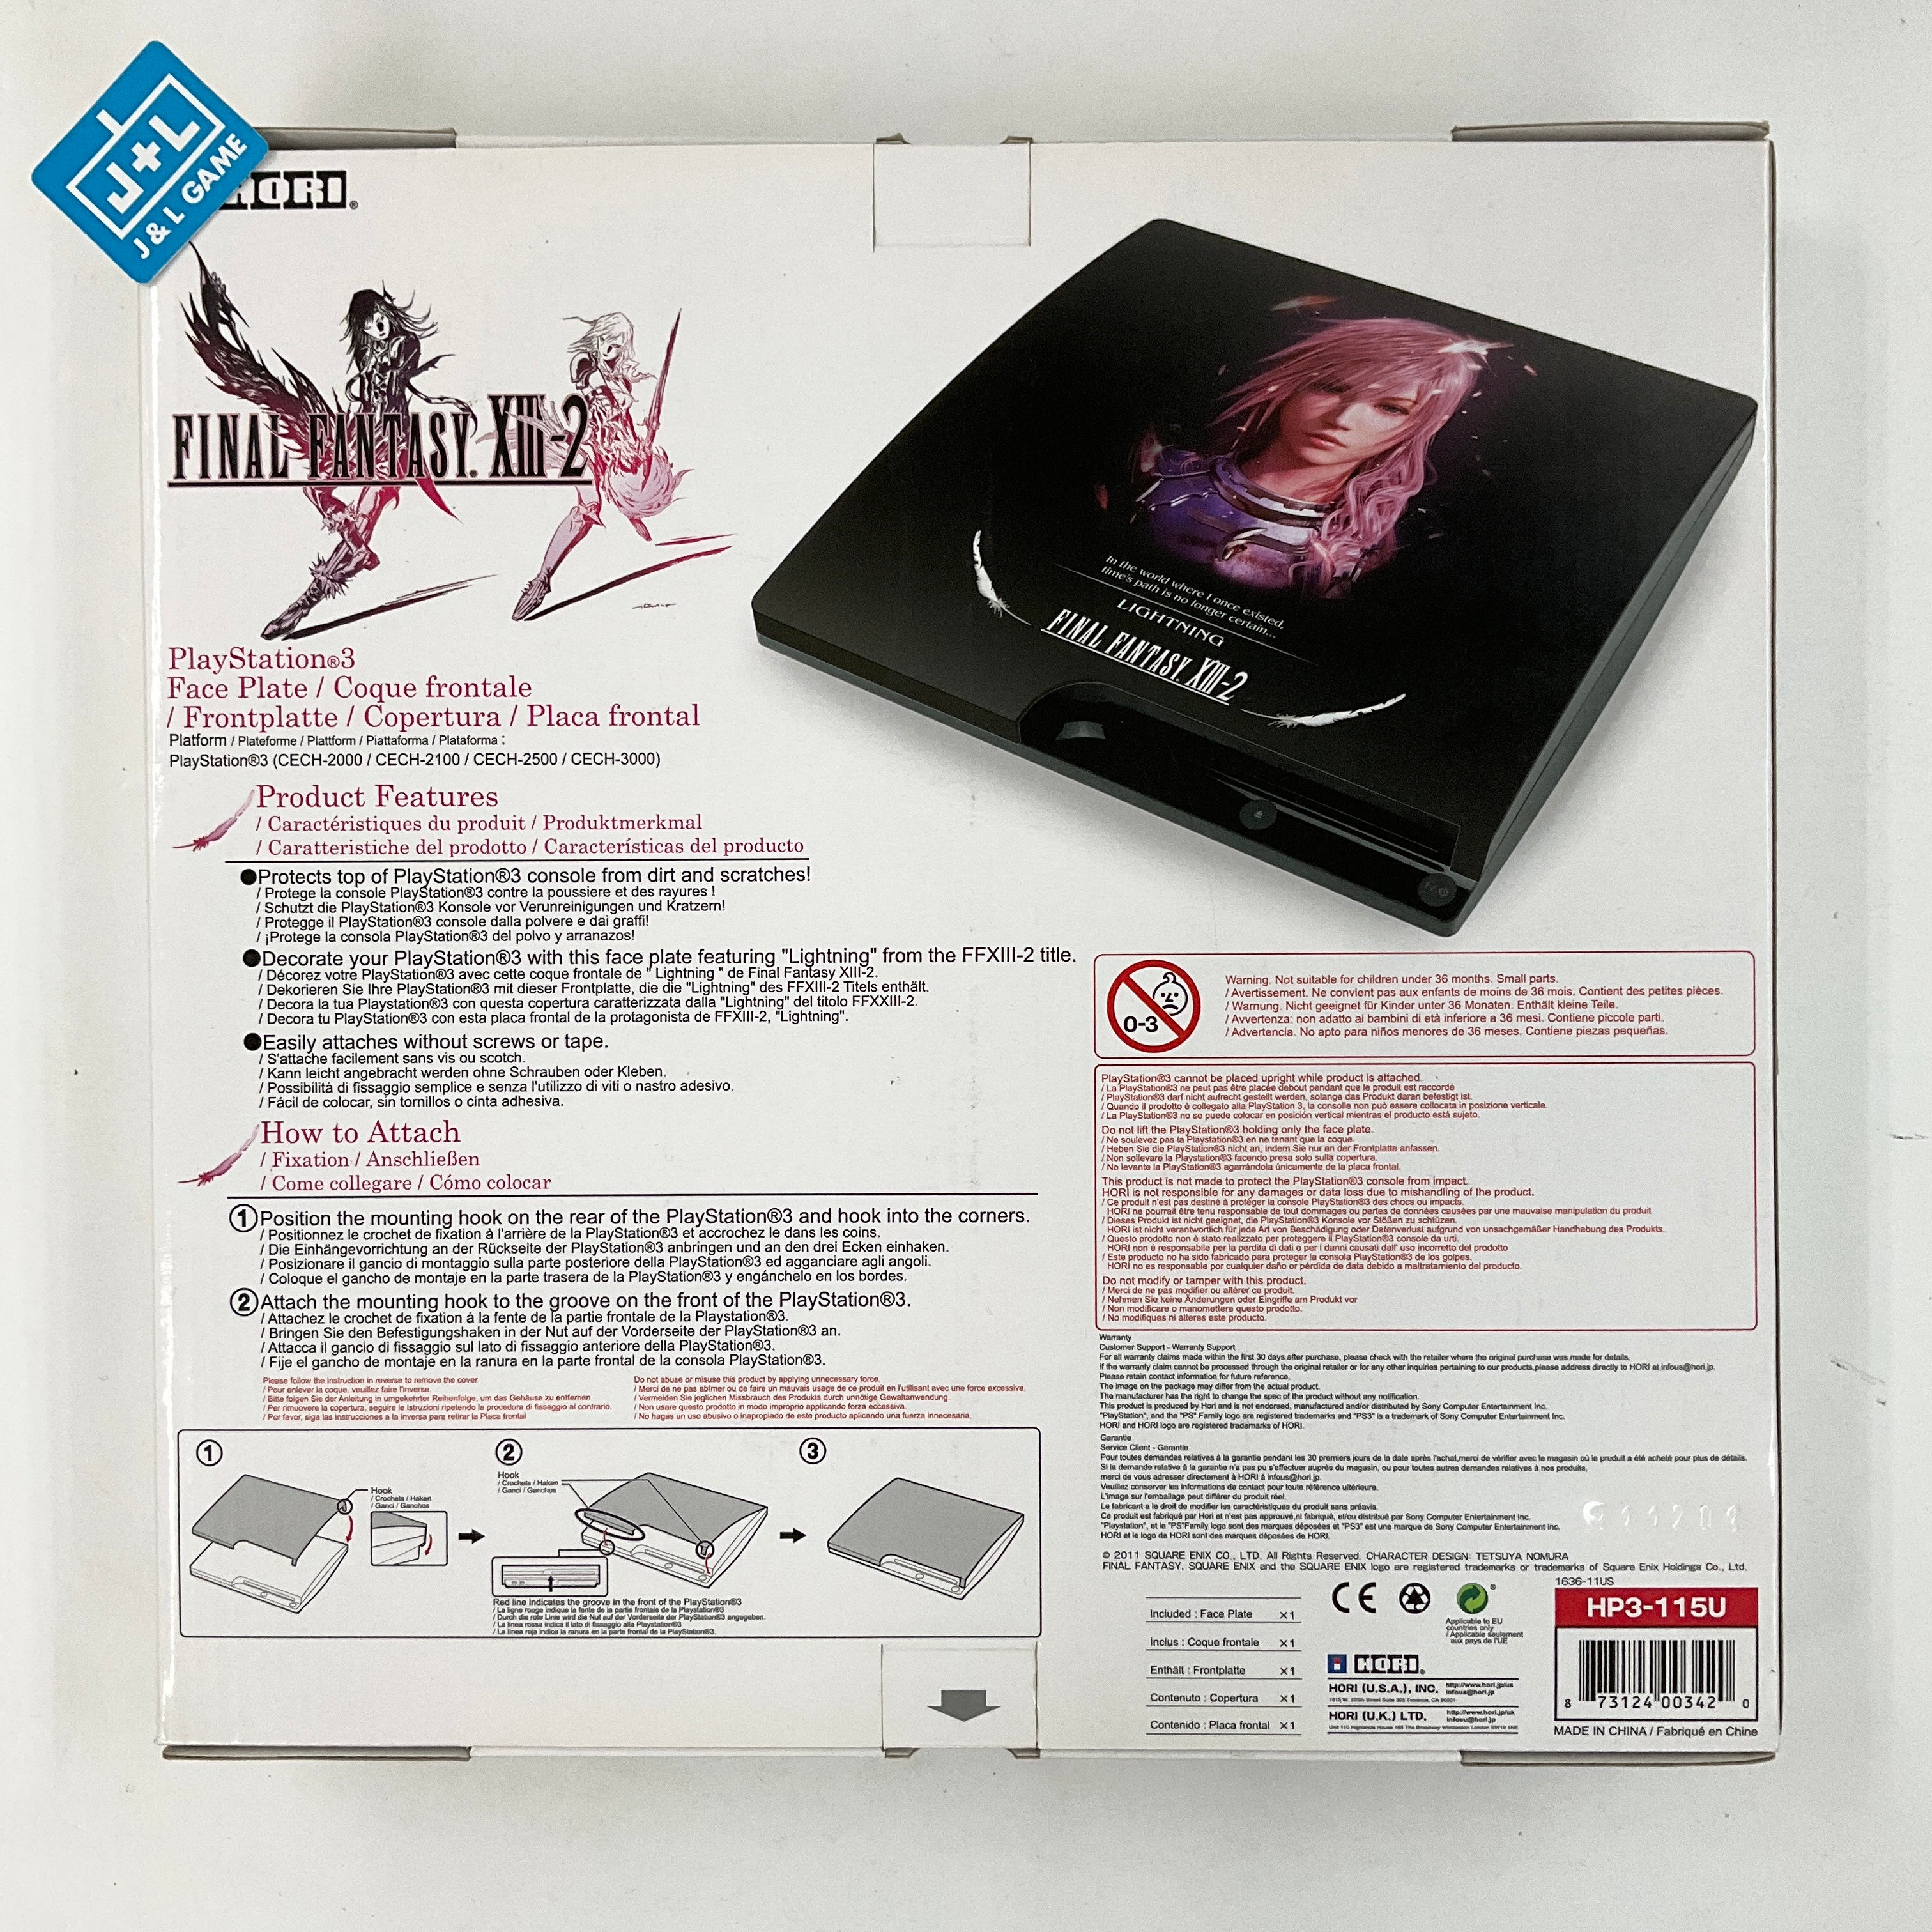 HORI PlayStation 3 Slim Final Fantasy XIII-2 Face Plate - (PS3) PlayStation 3 Accessories HORI   